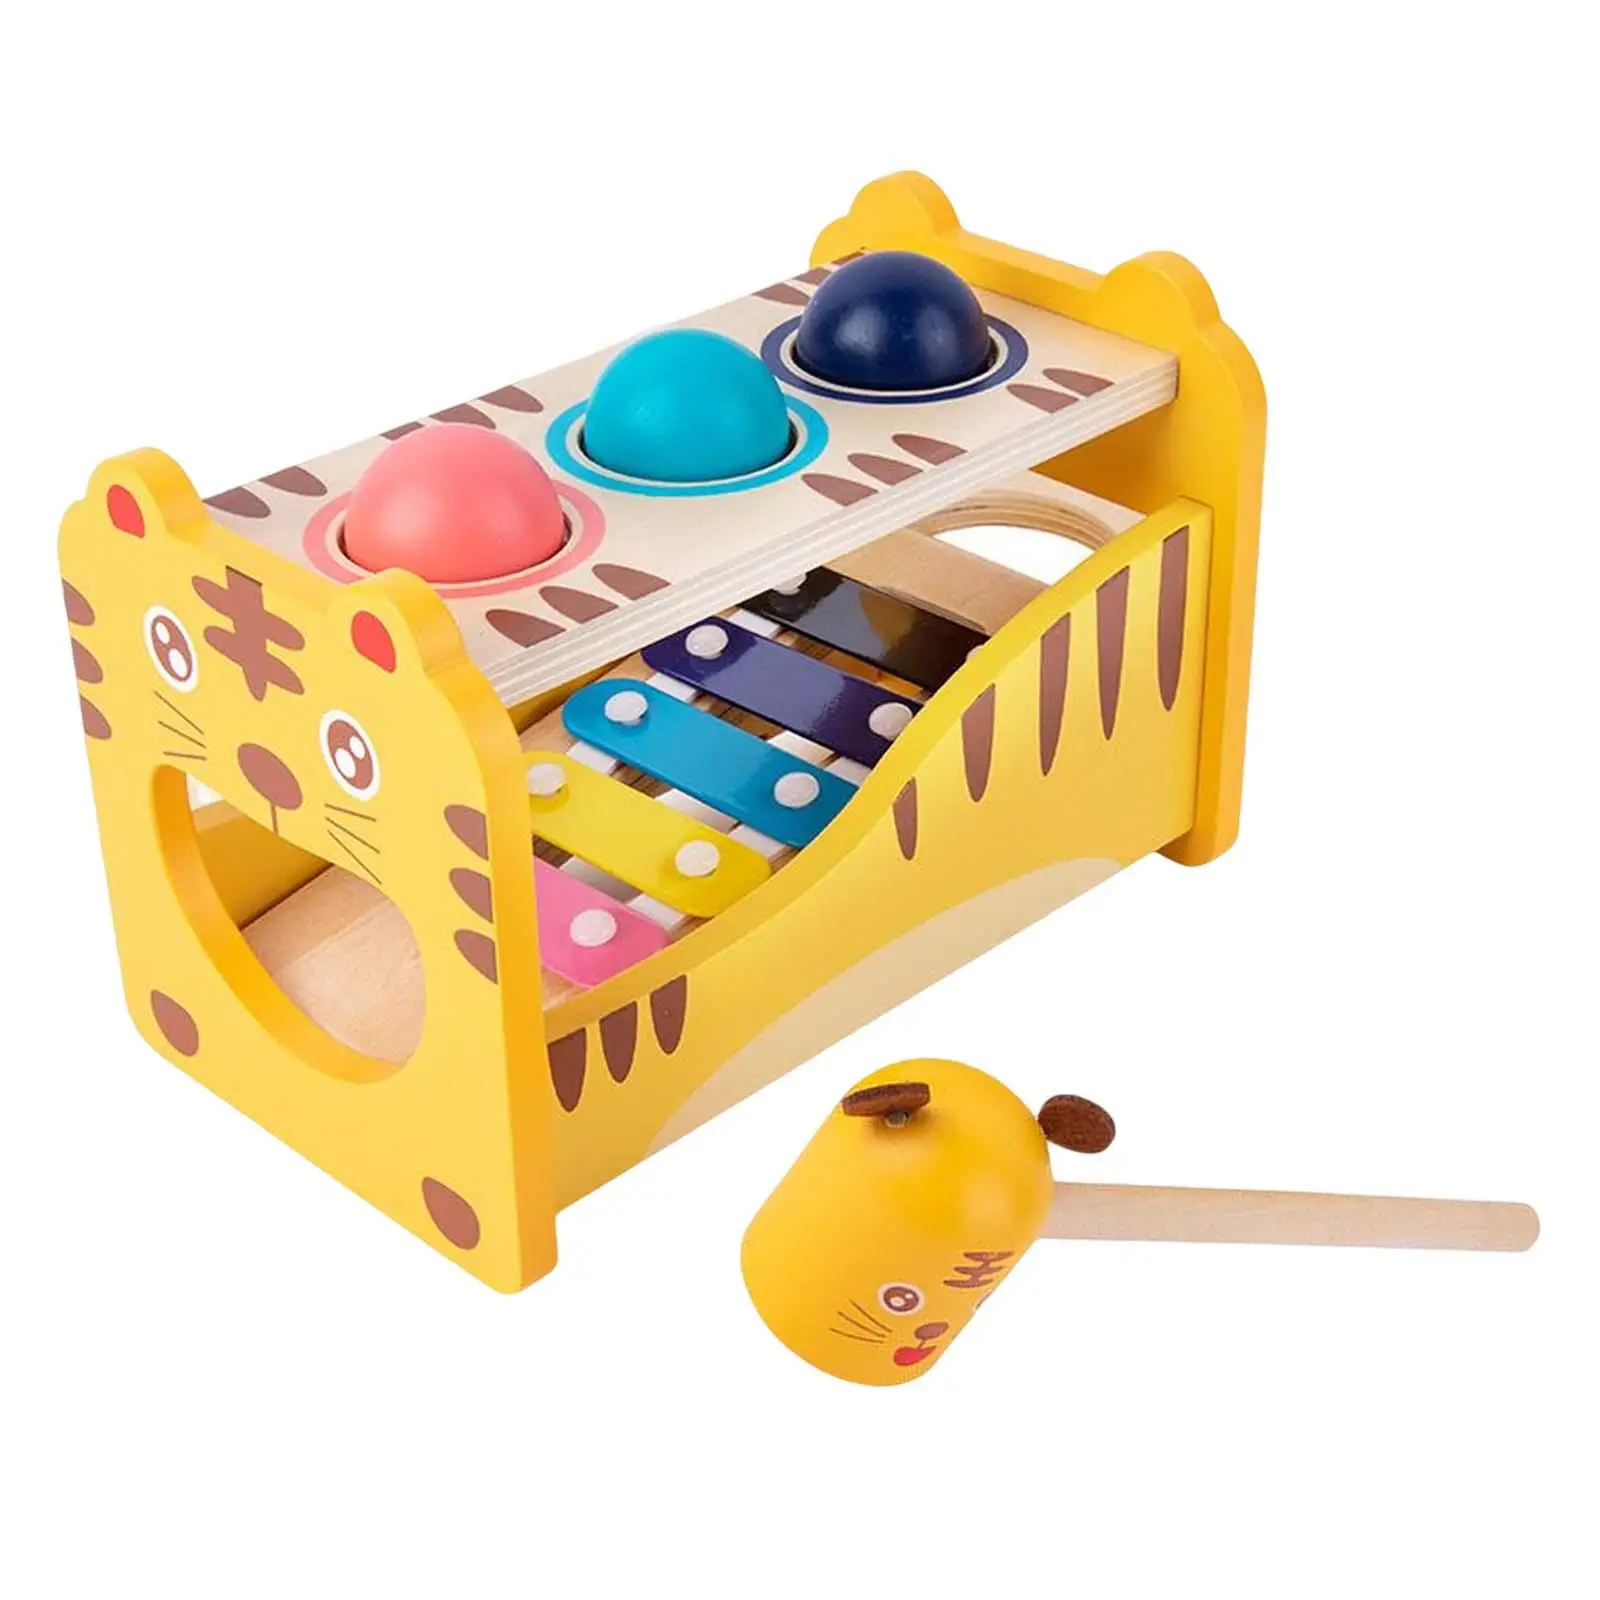 Wooden Musical Pounding toys color Recognition Developmental Hammering Toys for Boy